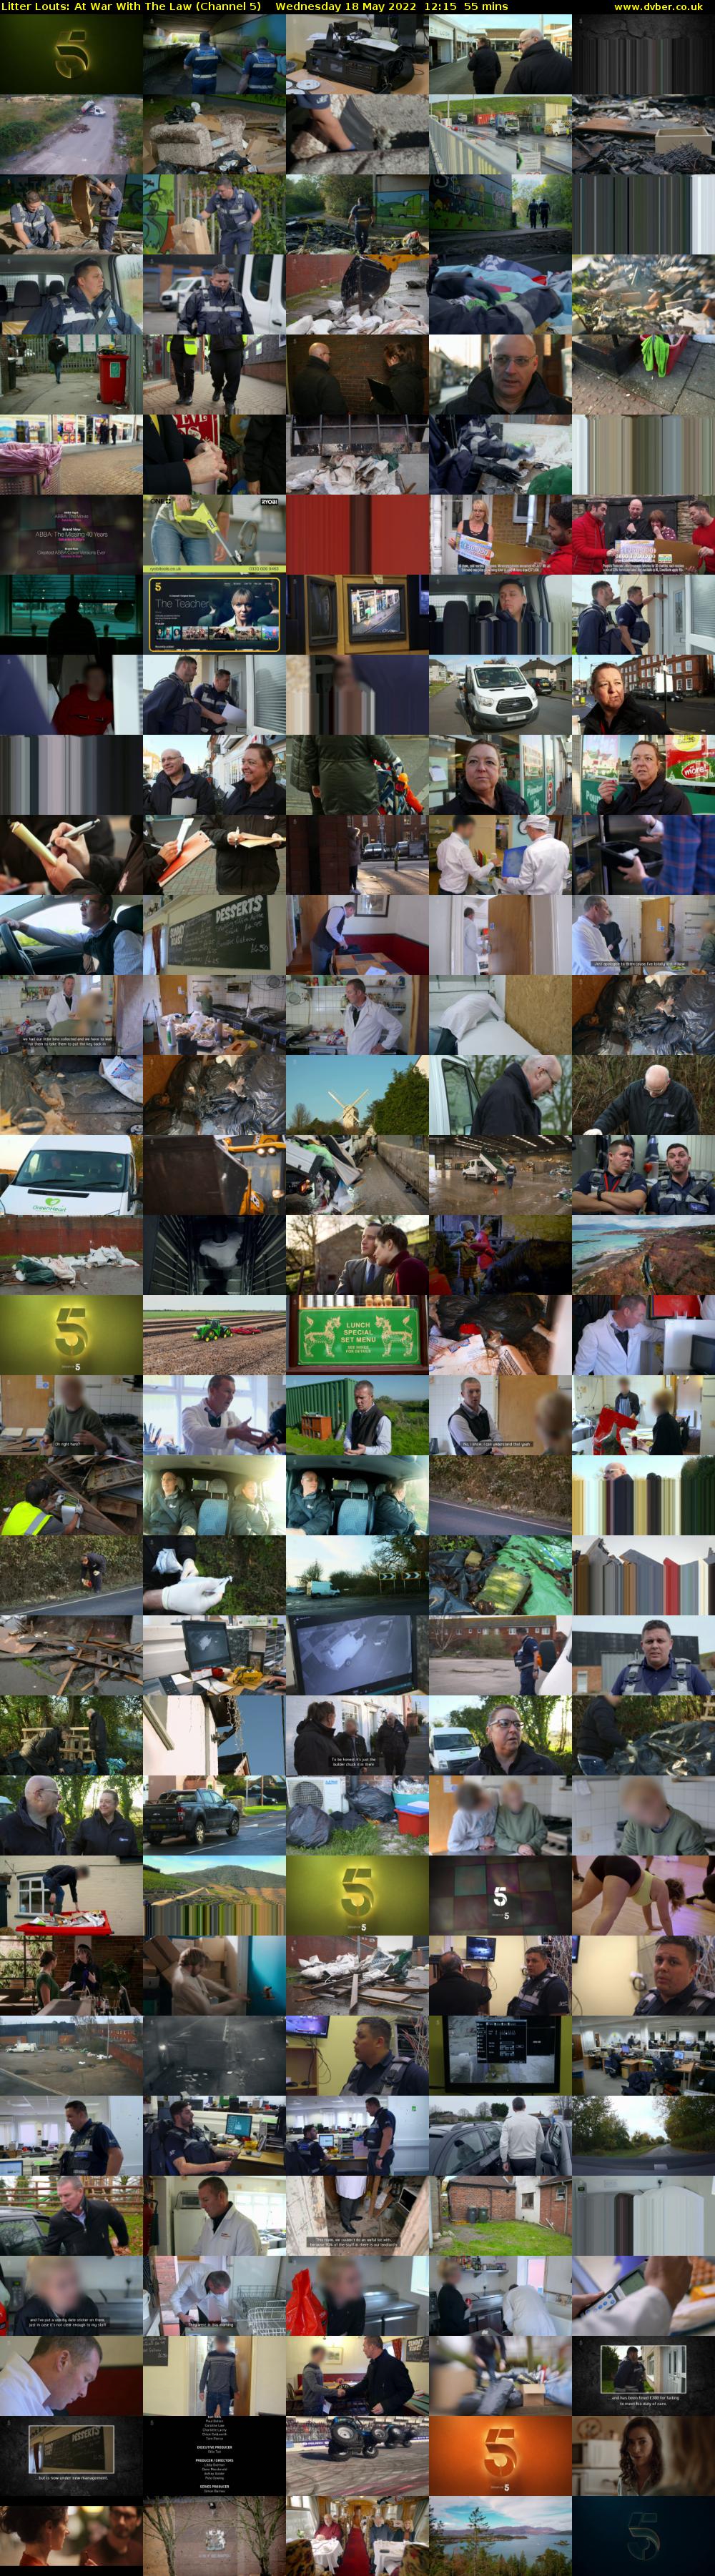 Litter Louts: At War With The Law (Channel 5) Wednesday 18 May 2022 12:15 - 13:10